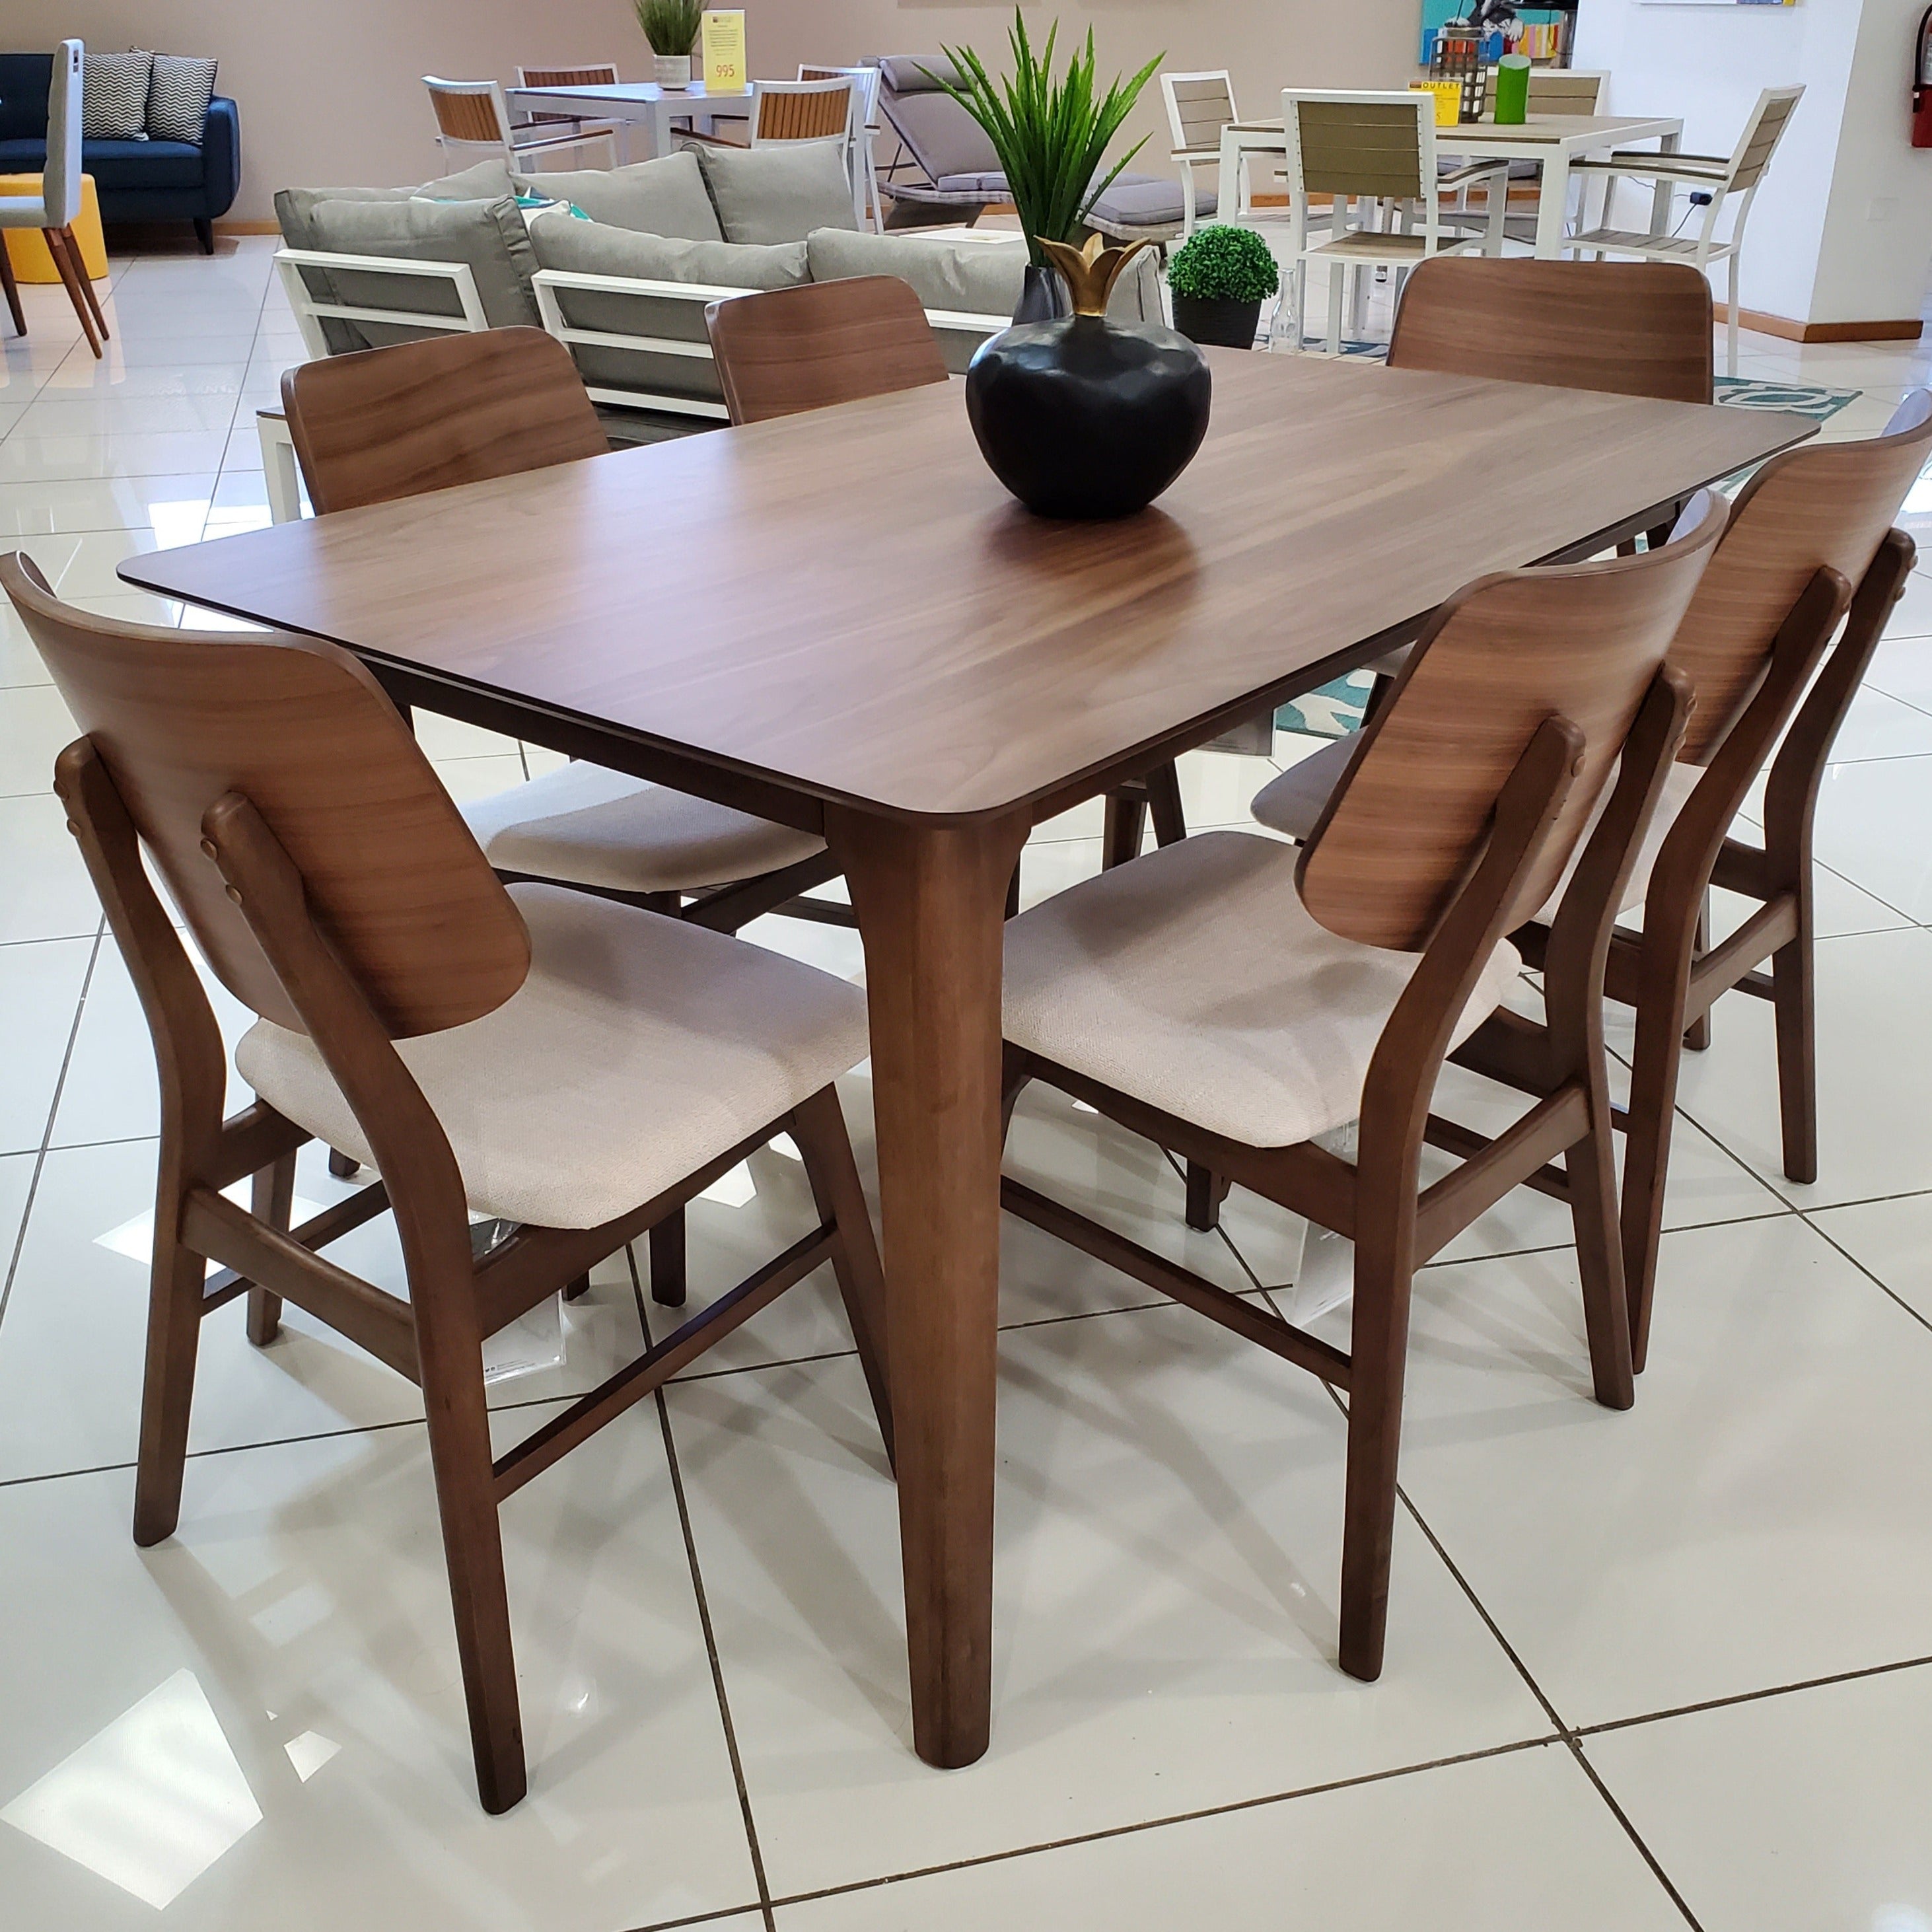 D1651 - Oscar Rect. Dining Table 60"x30" + (4) Dining Chair (Natural Walnut Finish)